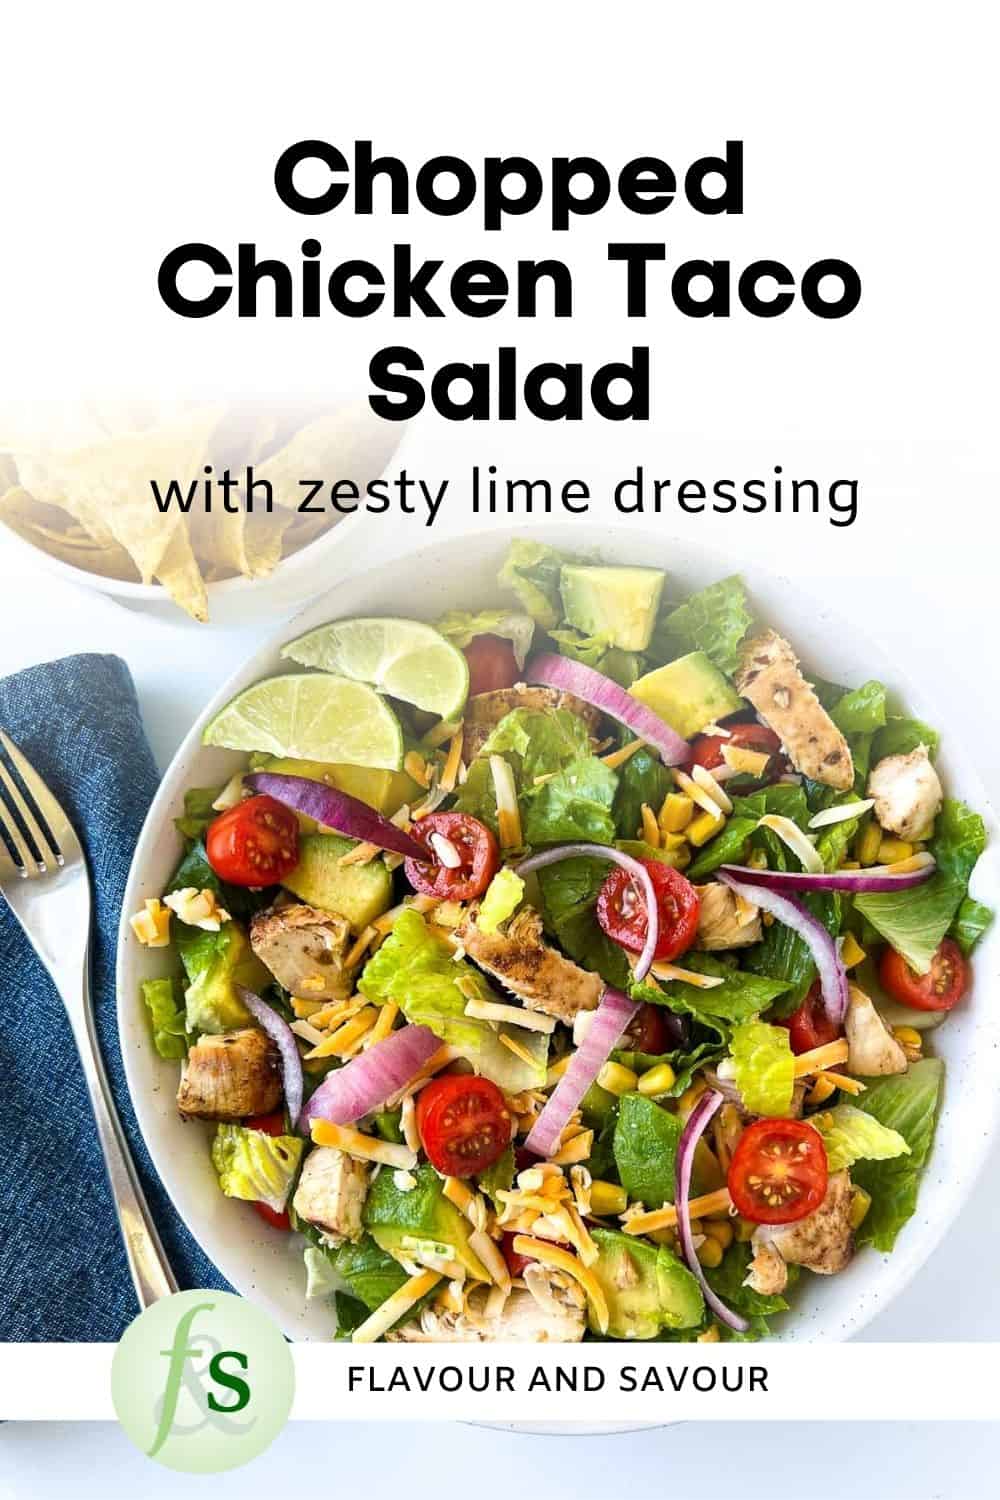 Image with text for chicken taco salad.